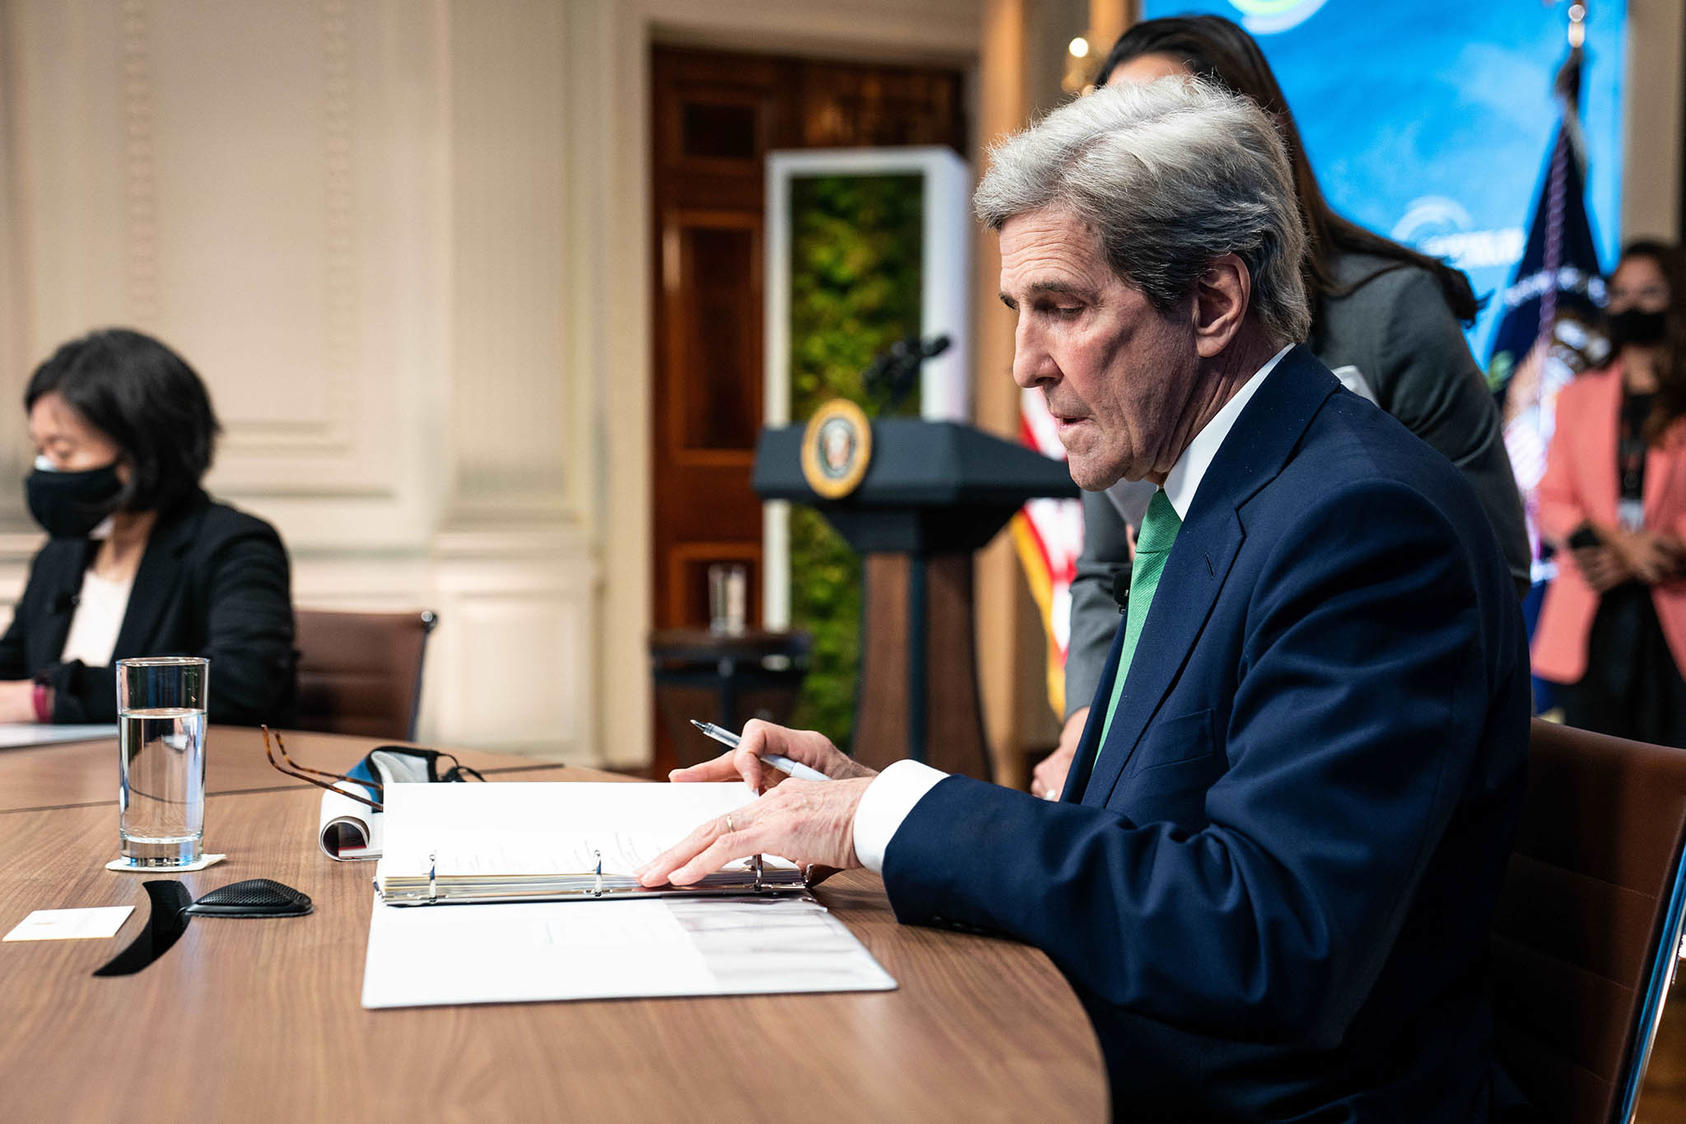 Special Envoy John Kerry looks at his notes before the virtual Leaders Summit on Climate in Washington, D.C. April 23, 2021. (Anna Moneymaker/The New York Times)